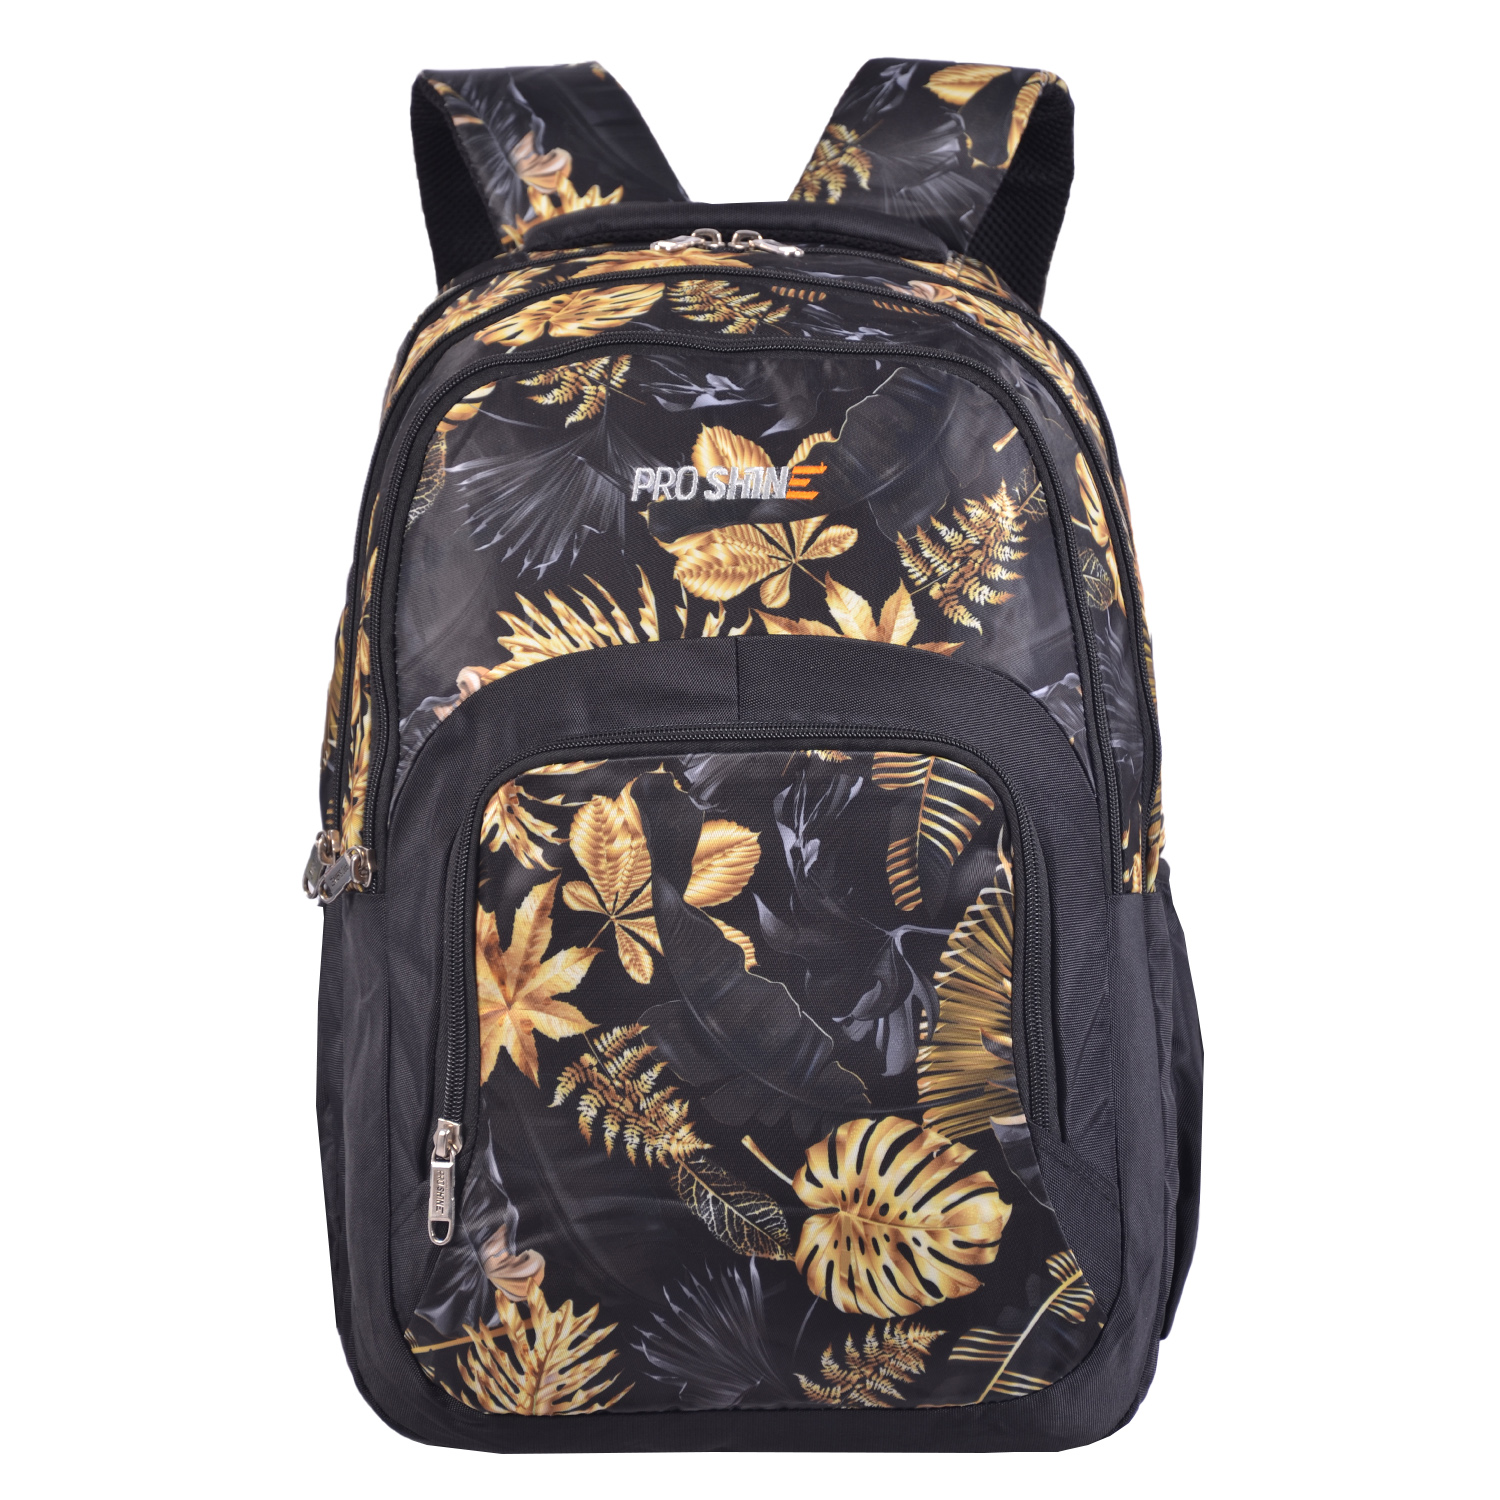 RoshanBags_PROSHINE 38L CASUAL BACKPACK A0398 BLACK YELLOW